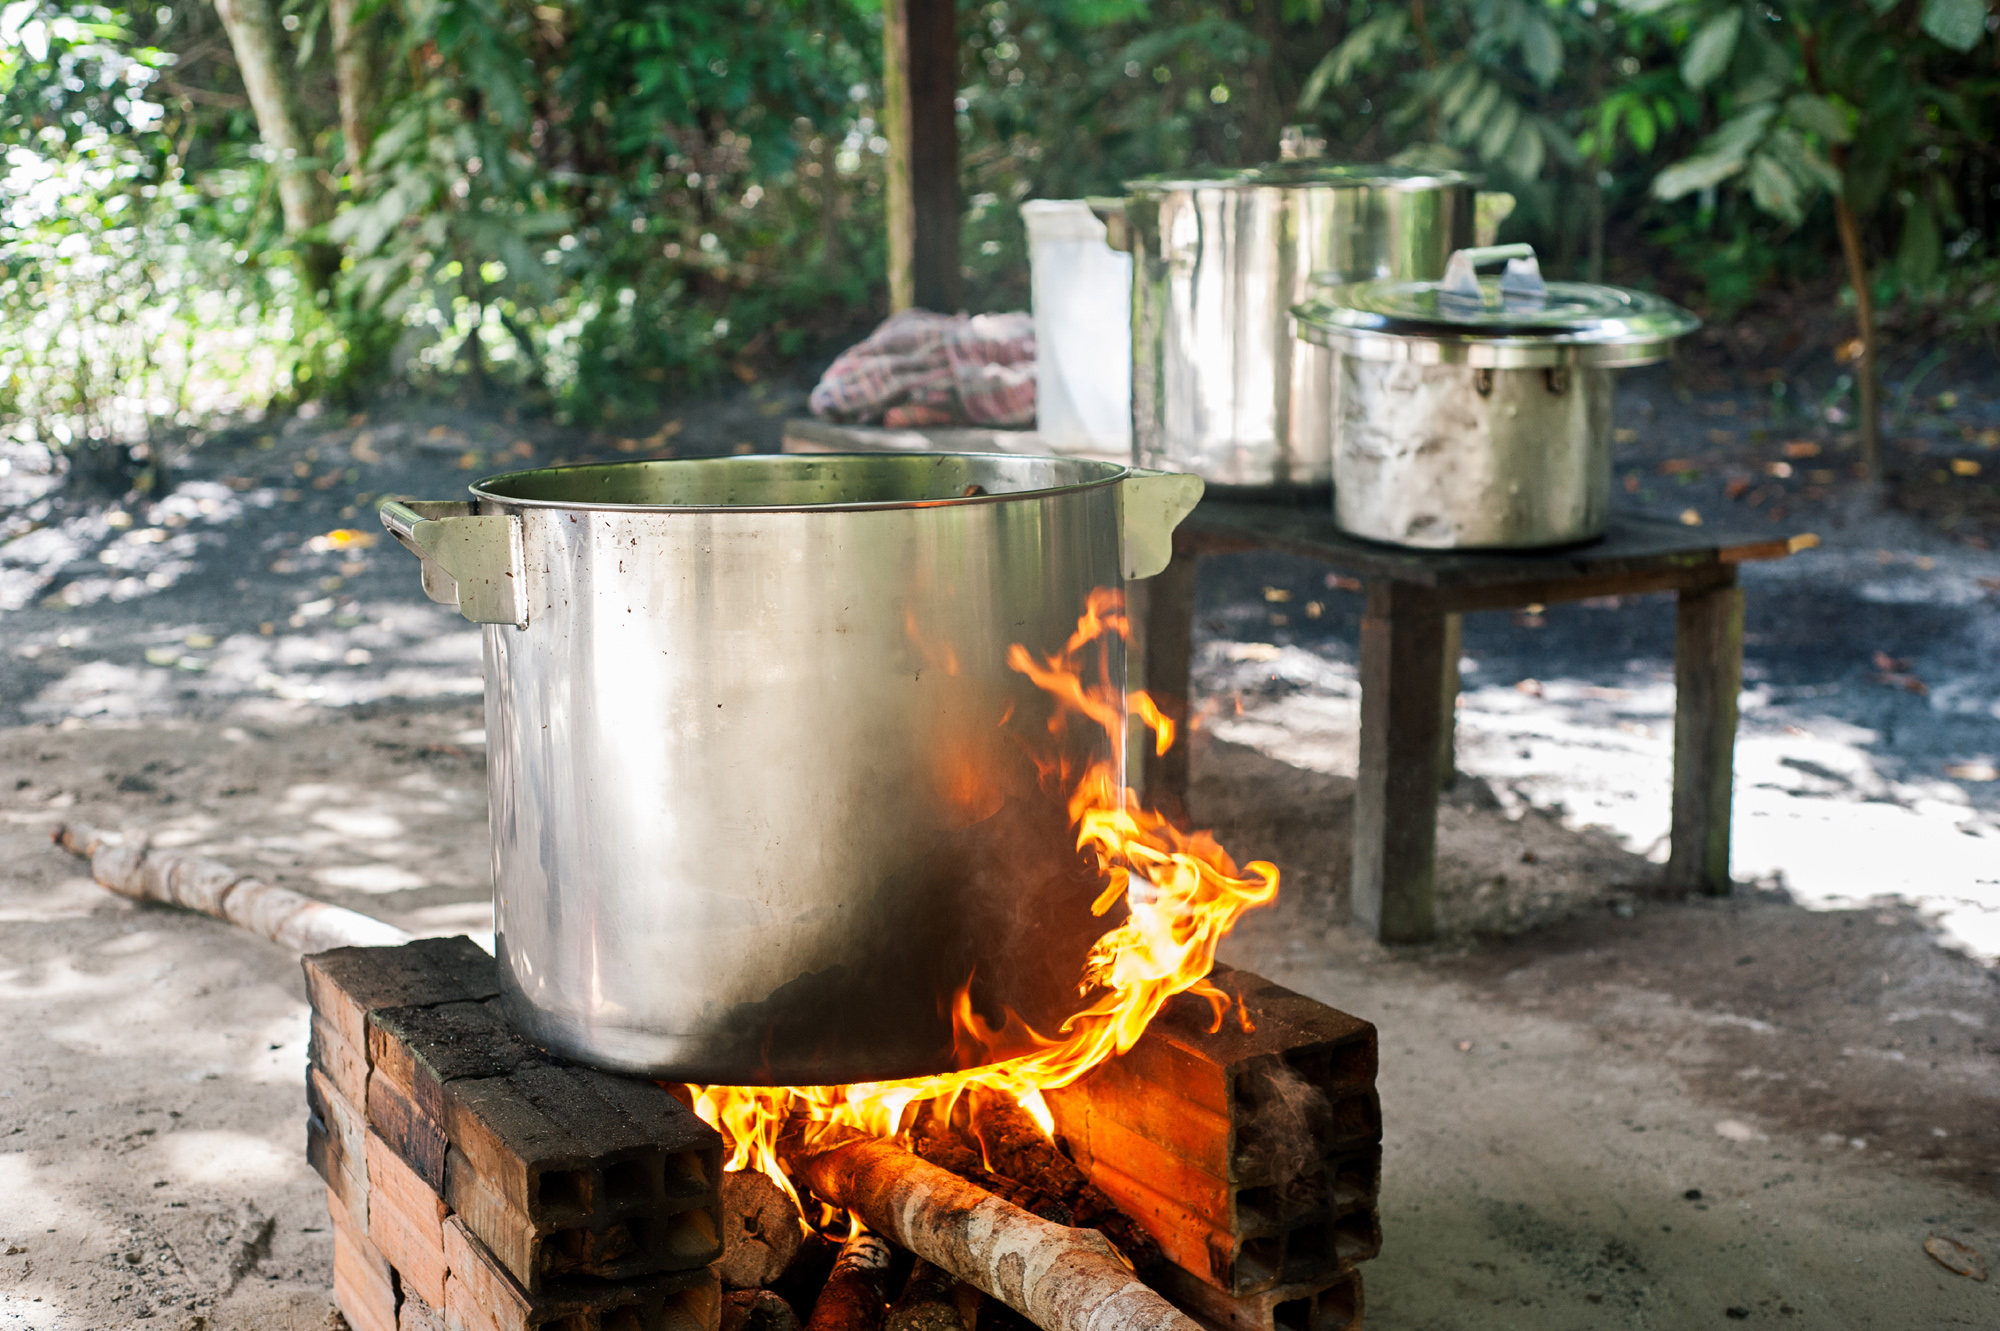 Ayahuasca boiling down the brew in the Amazon jungle. Photo by Tracey Eller / Cosmic Sister